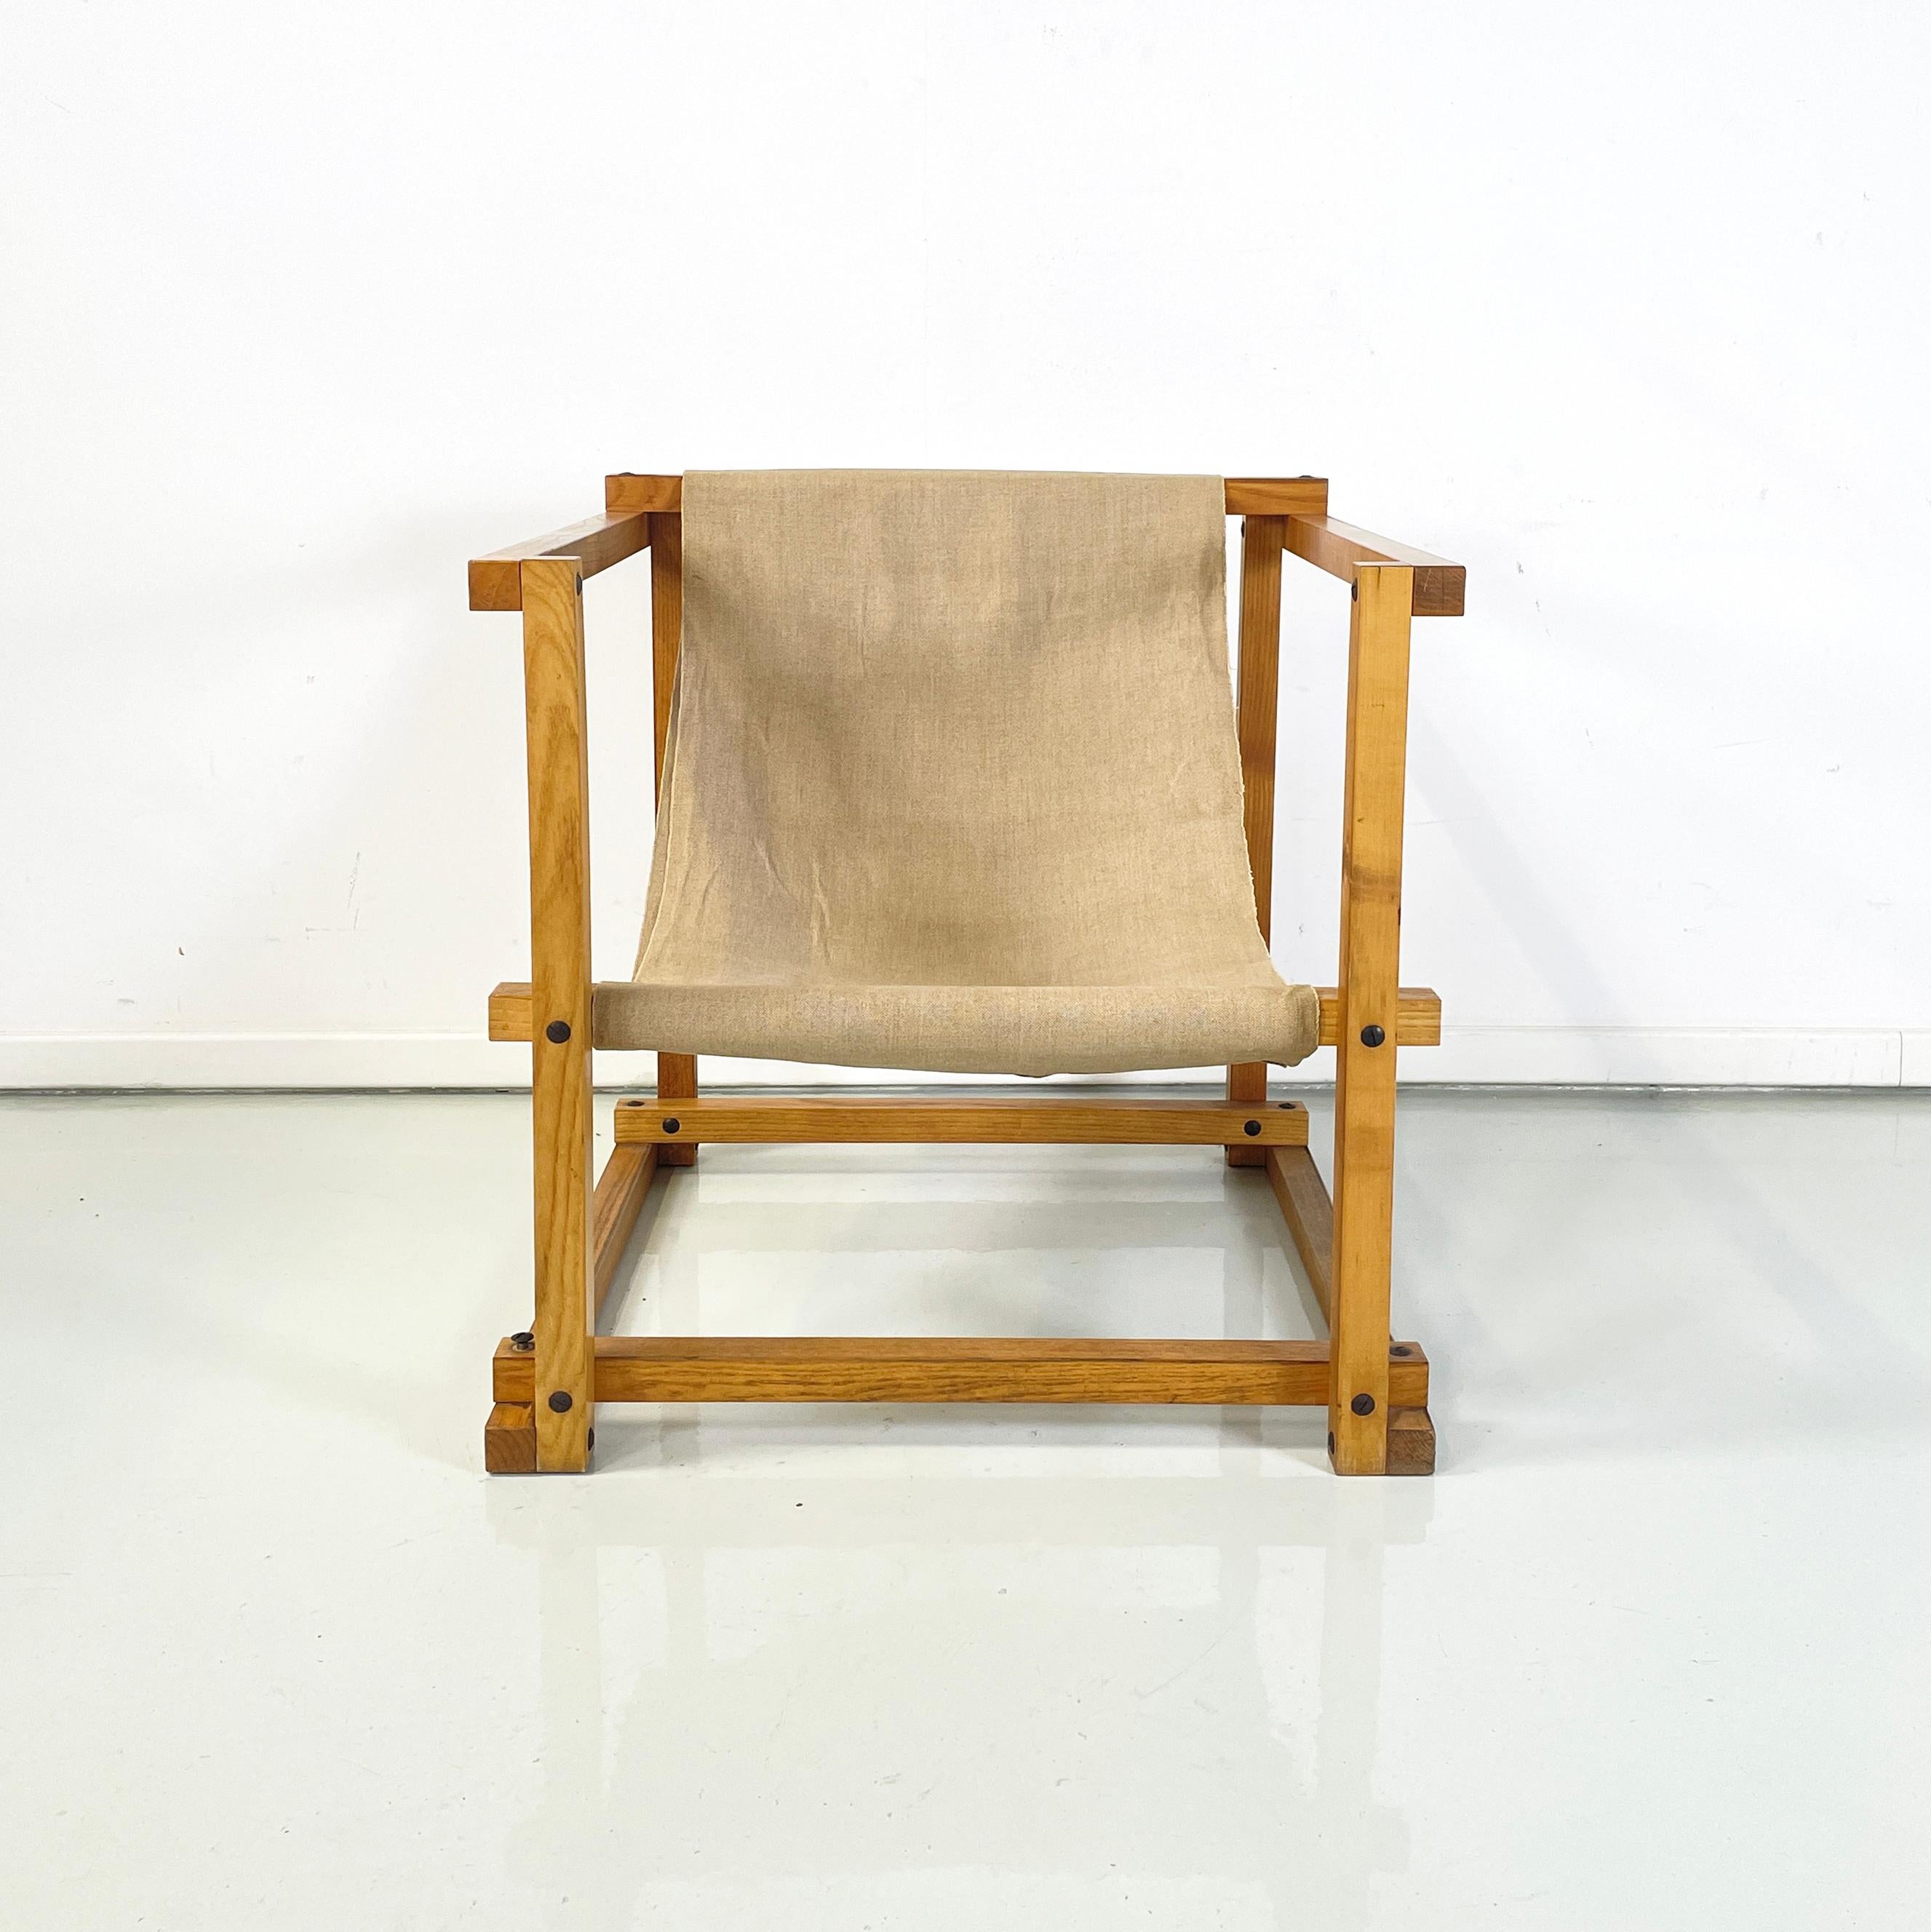 Italian mid-century modern Wood armchair with beige fabric by Pino Pedano, 1970s
Armchair with cubic shape, made up of several wooden slats with a square section, joined at the vertices by metal inserts. The seat and back of the chair are made of a